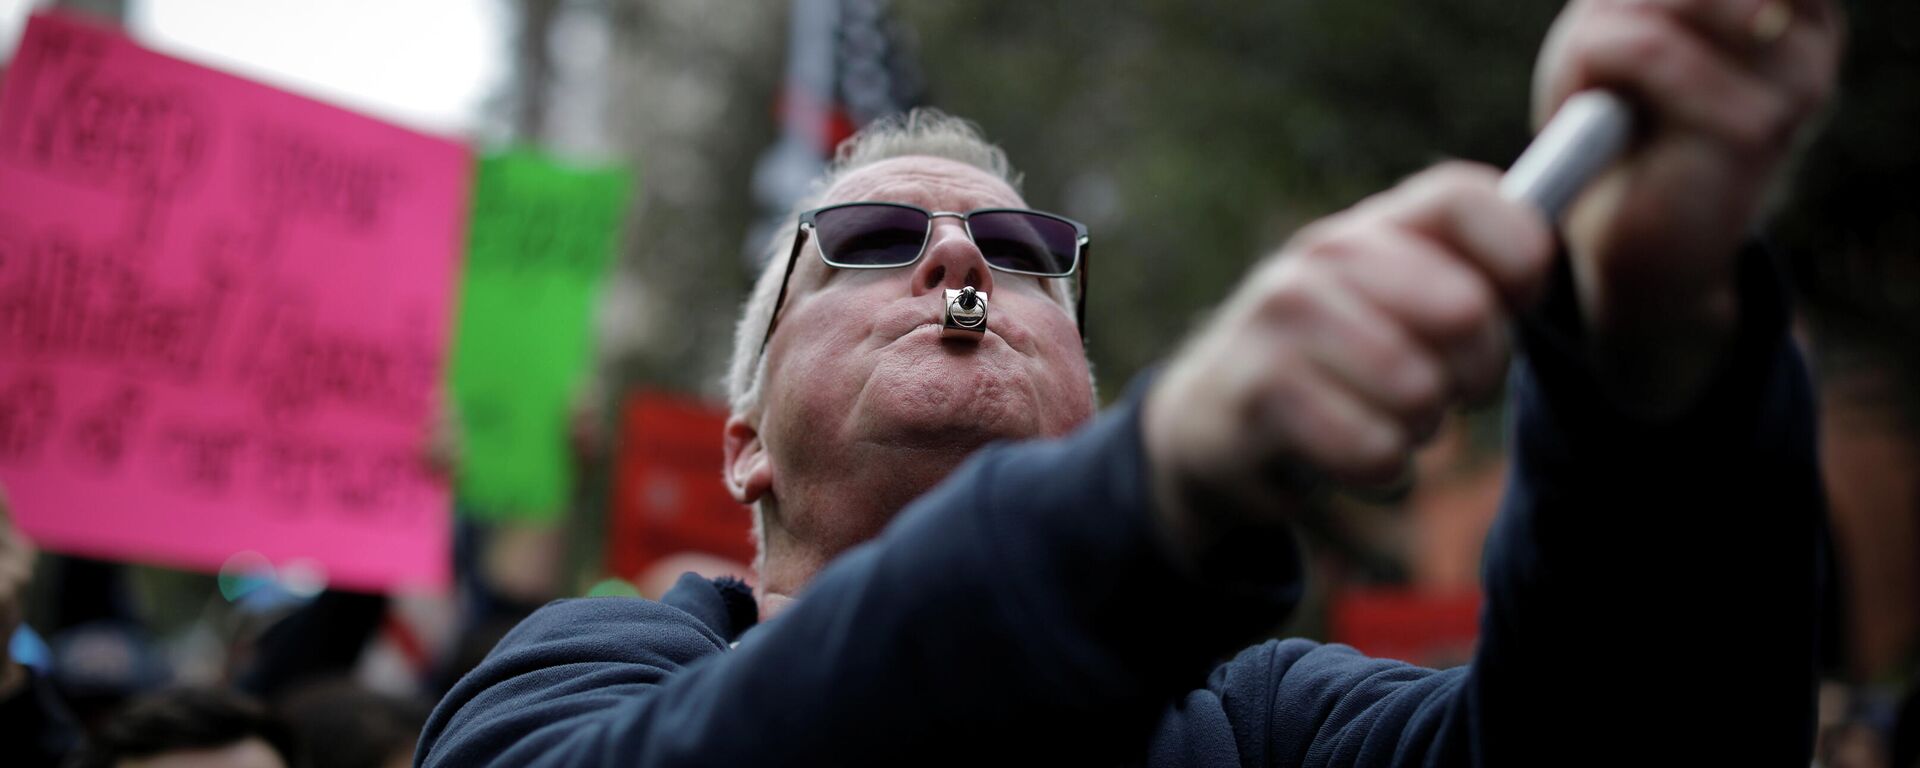 A demonstrator uses a whistle during a protest by New York City Fire Department (FDNY) union members, municipal workers and others, against the city's COVID-19 vaccine mandates on Manhattan's Upper East Side, in New York City, New York, U.S., October 28, 2021 - Sputnik International, 1920, 29.10.2021